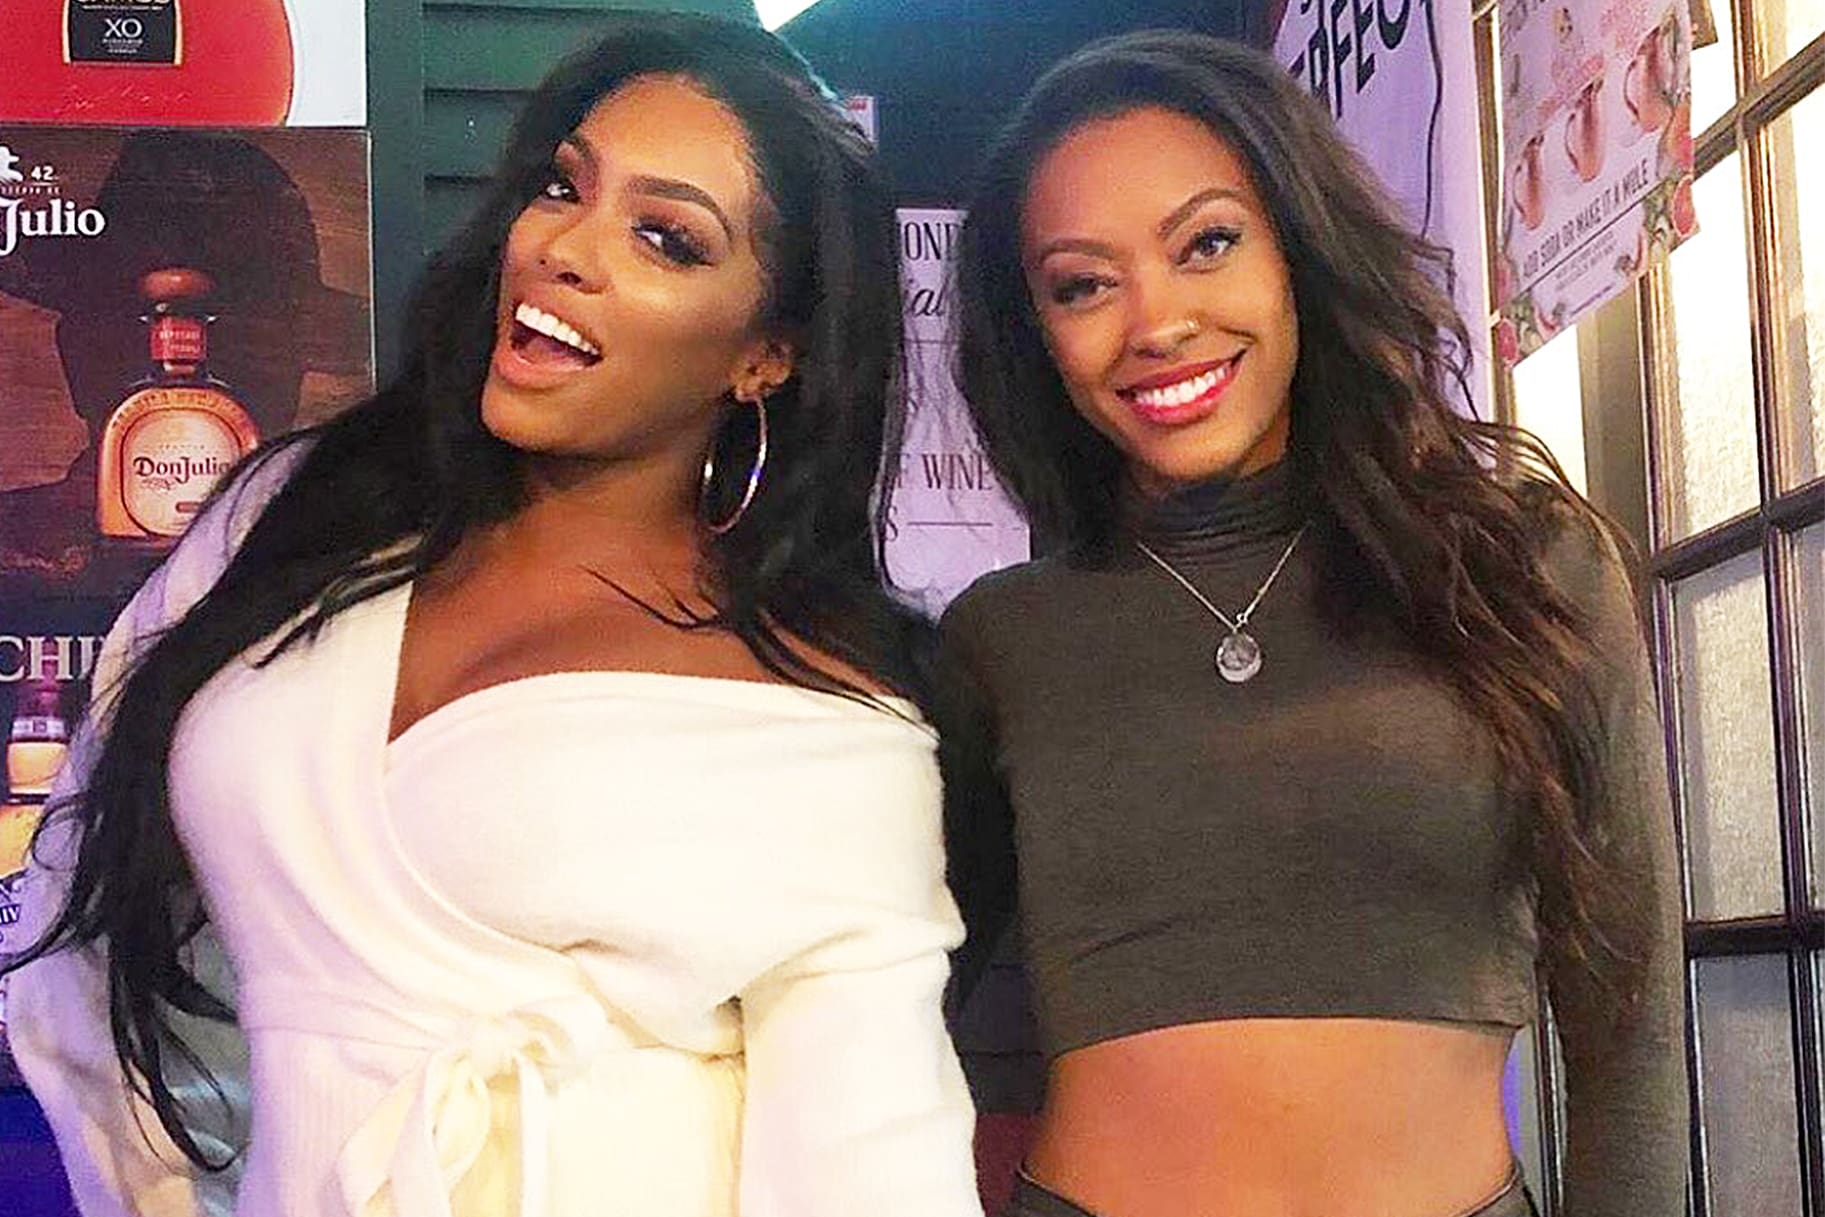 Porsha Williams Is Twinning With Her Sister, Lauren Williams In These Photos